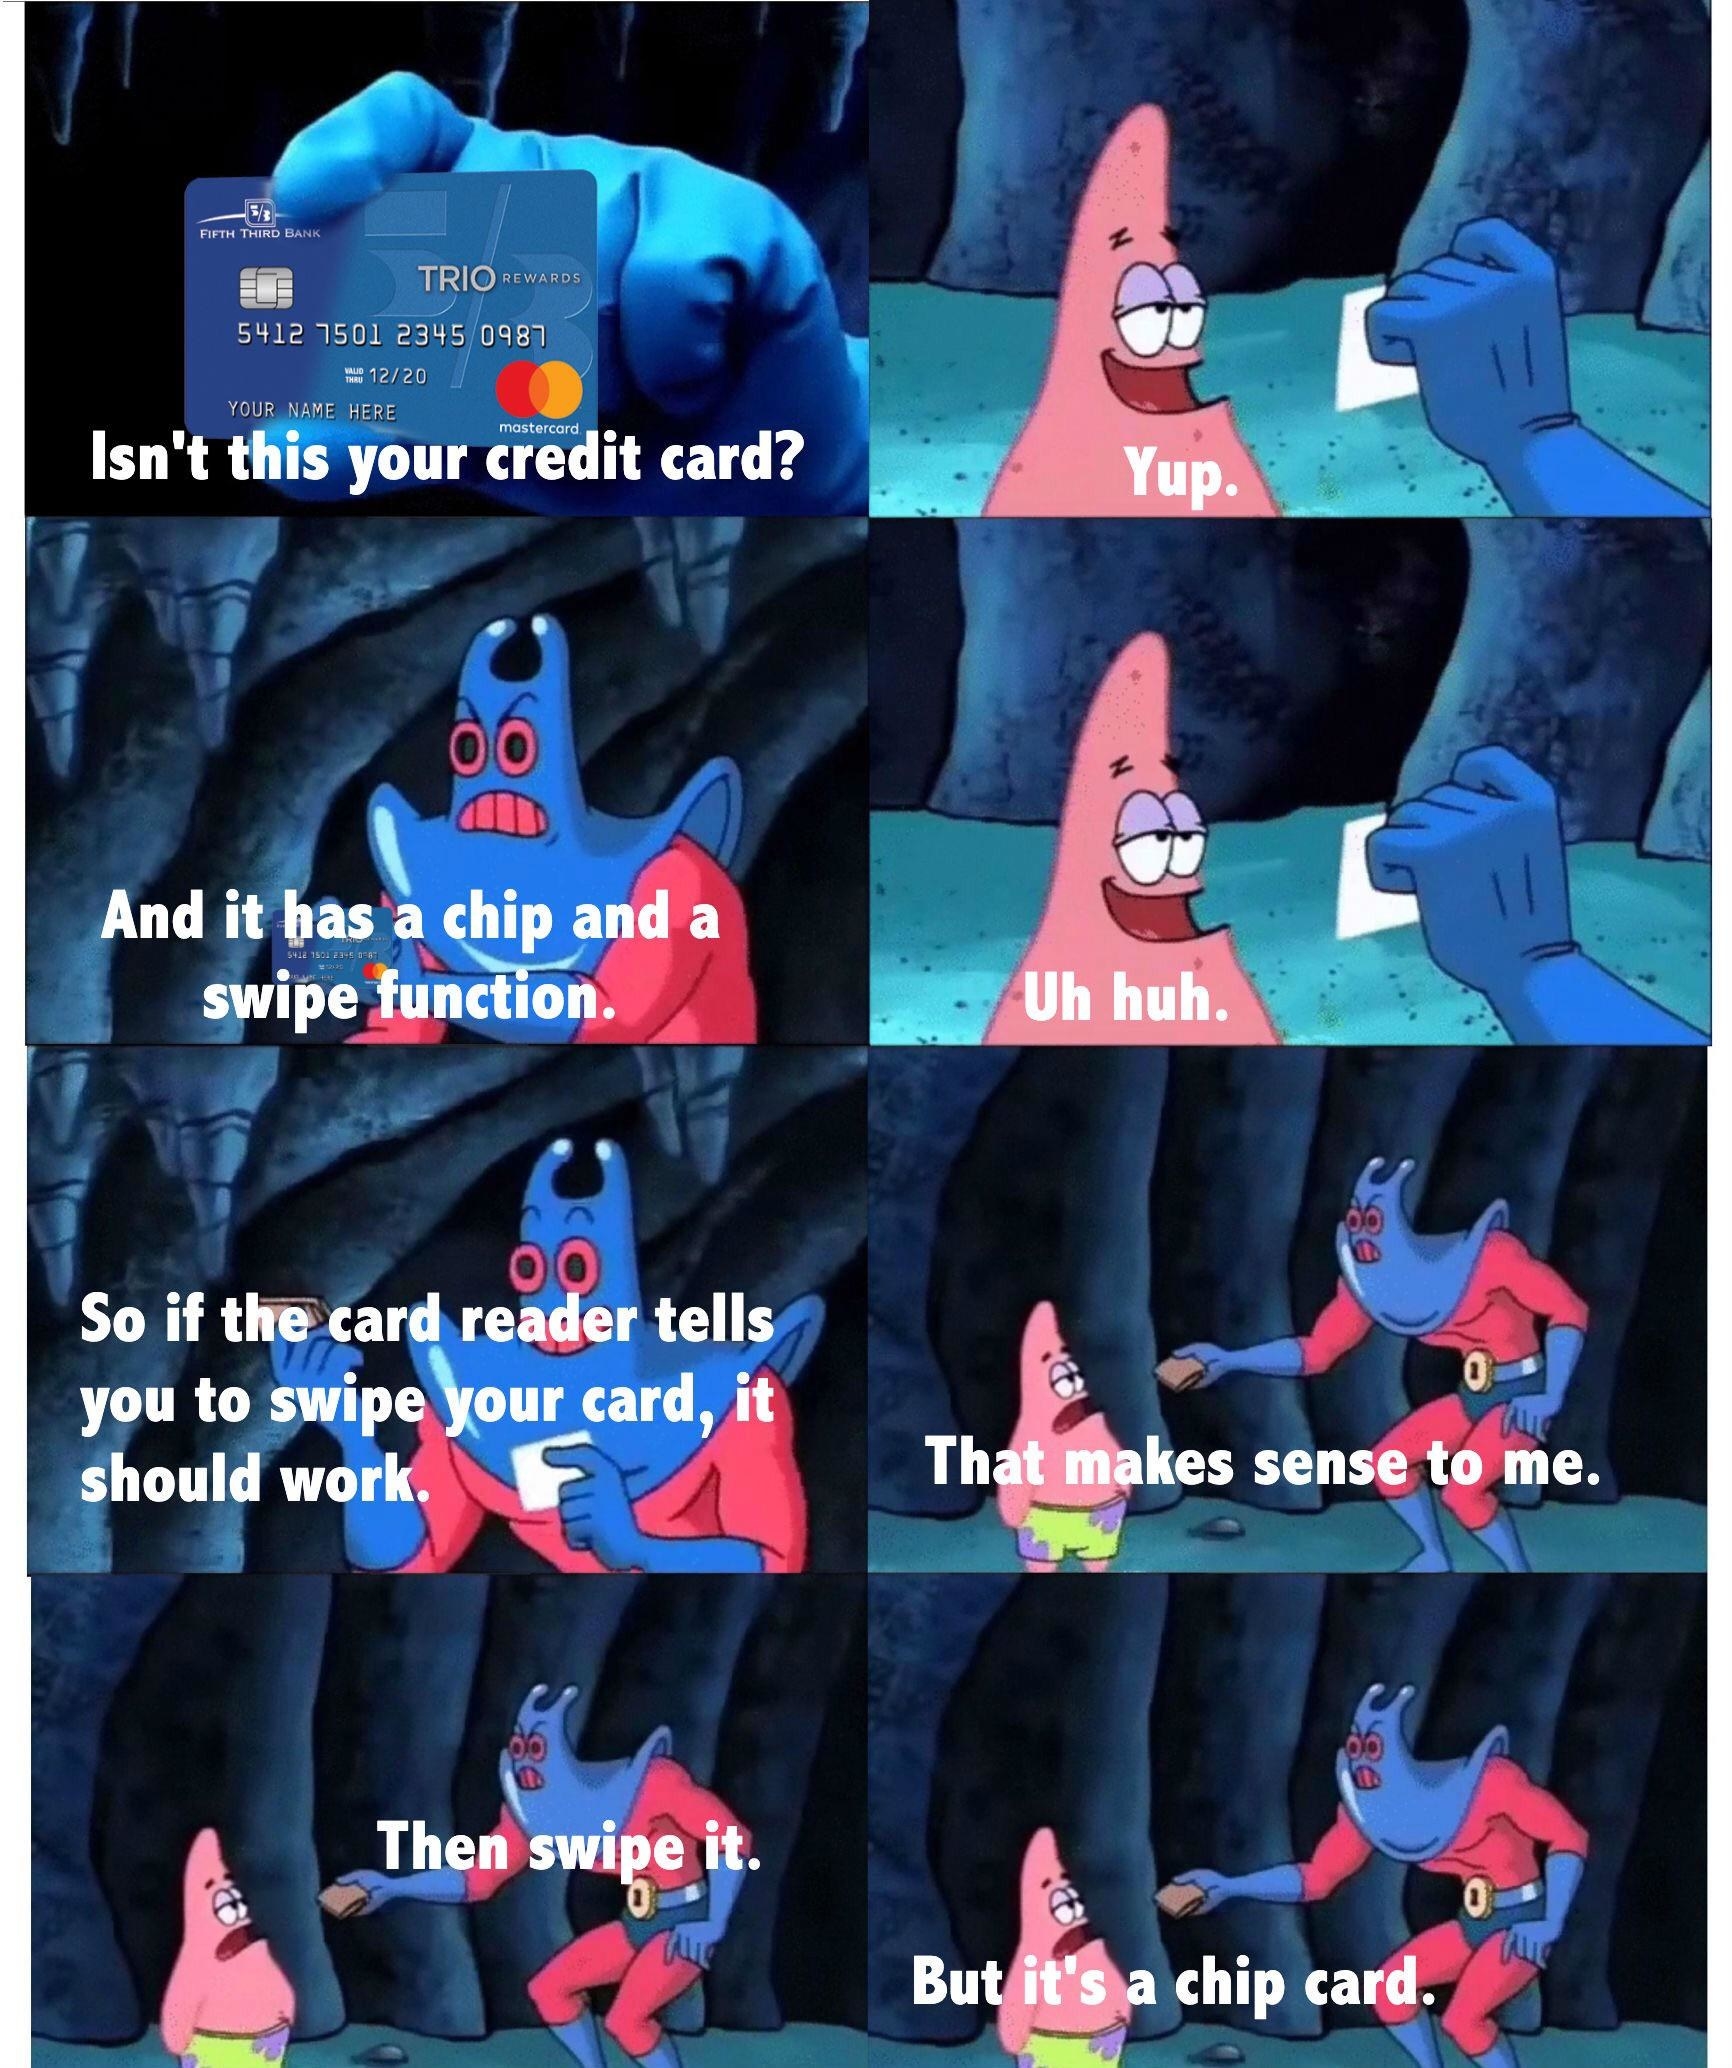 Meme of a customer not sure how a credit card machine works